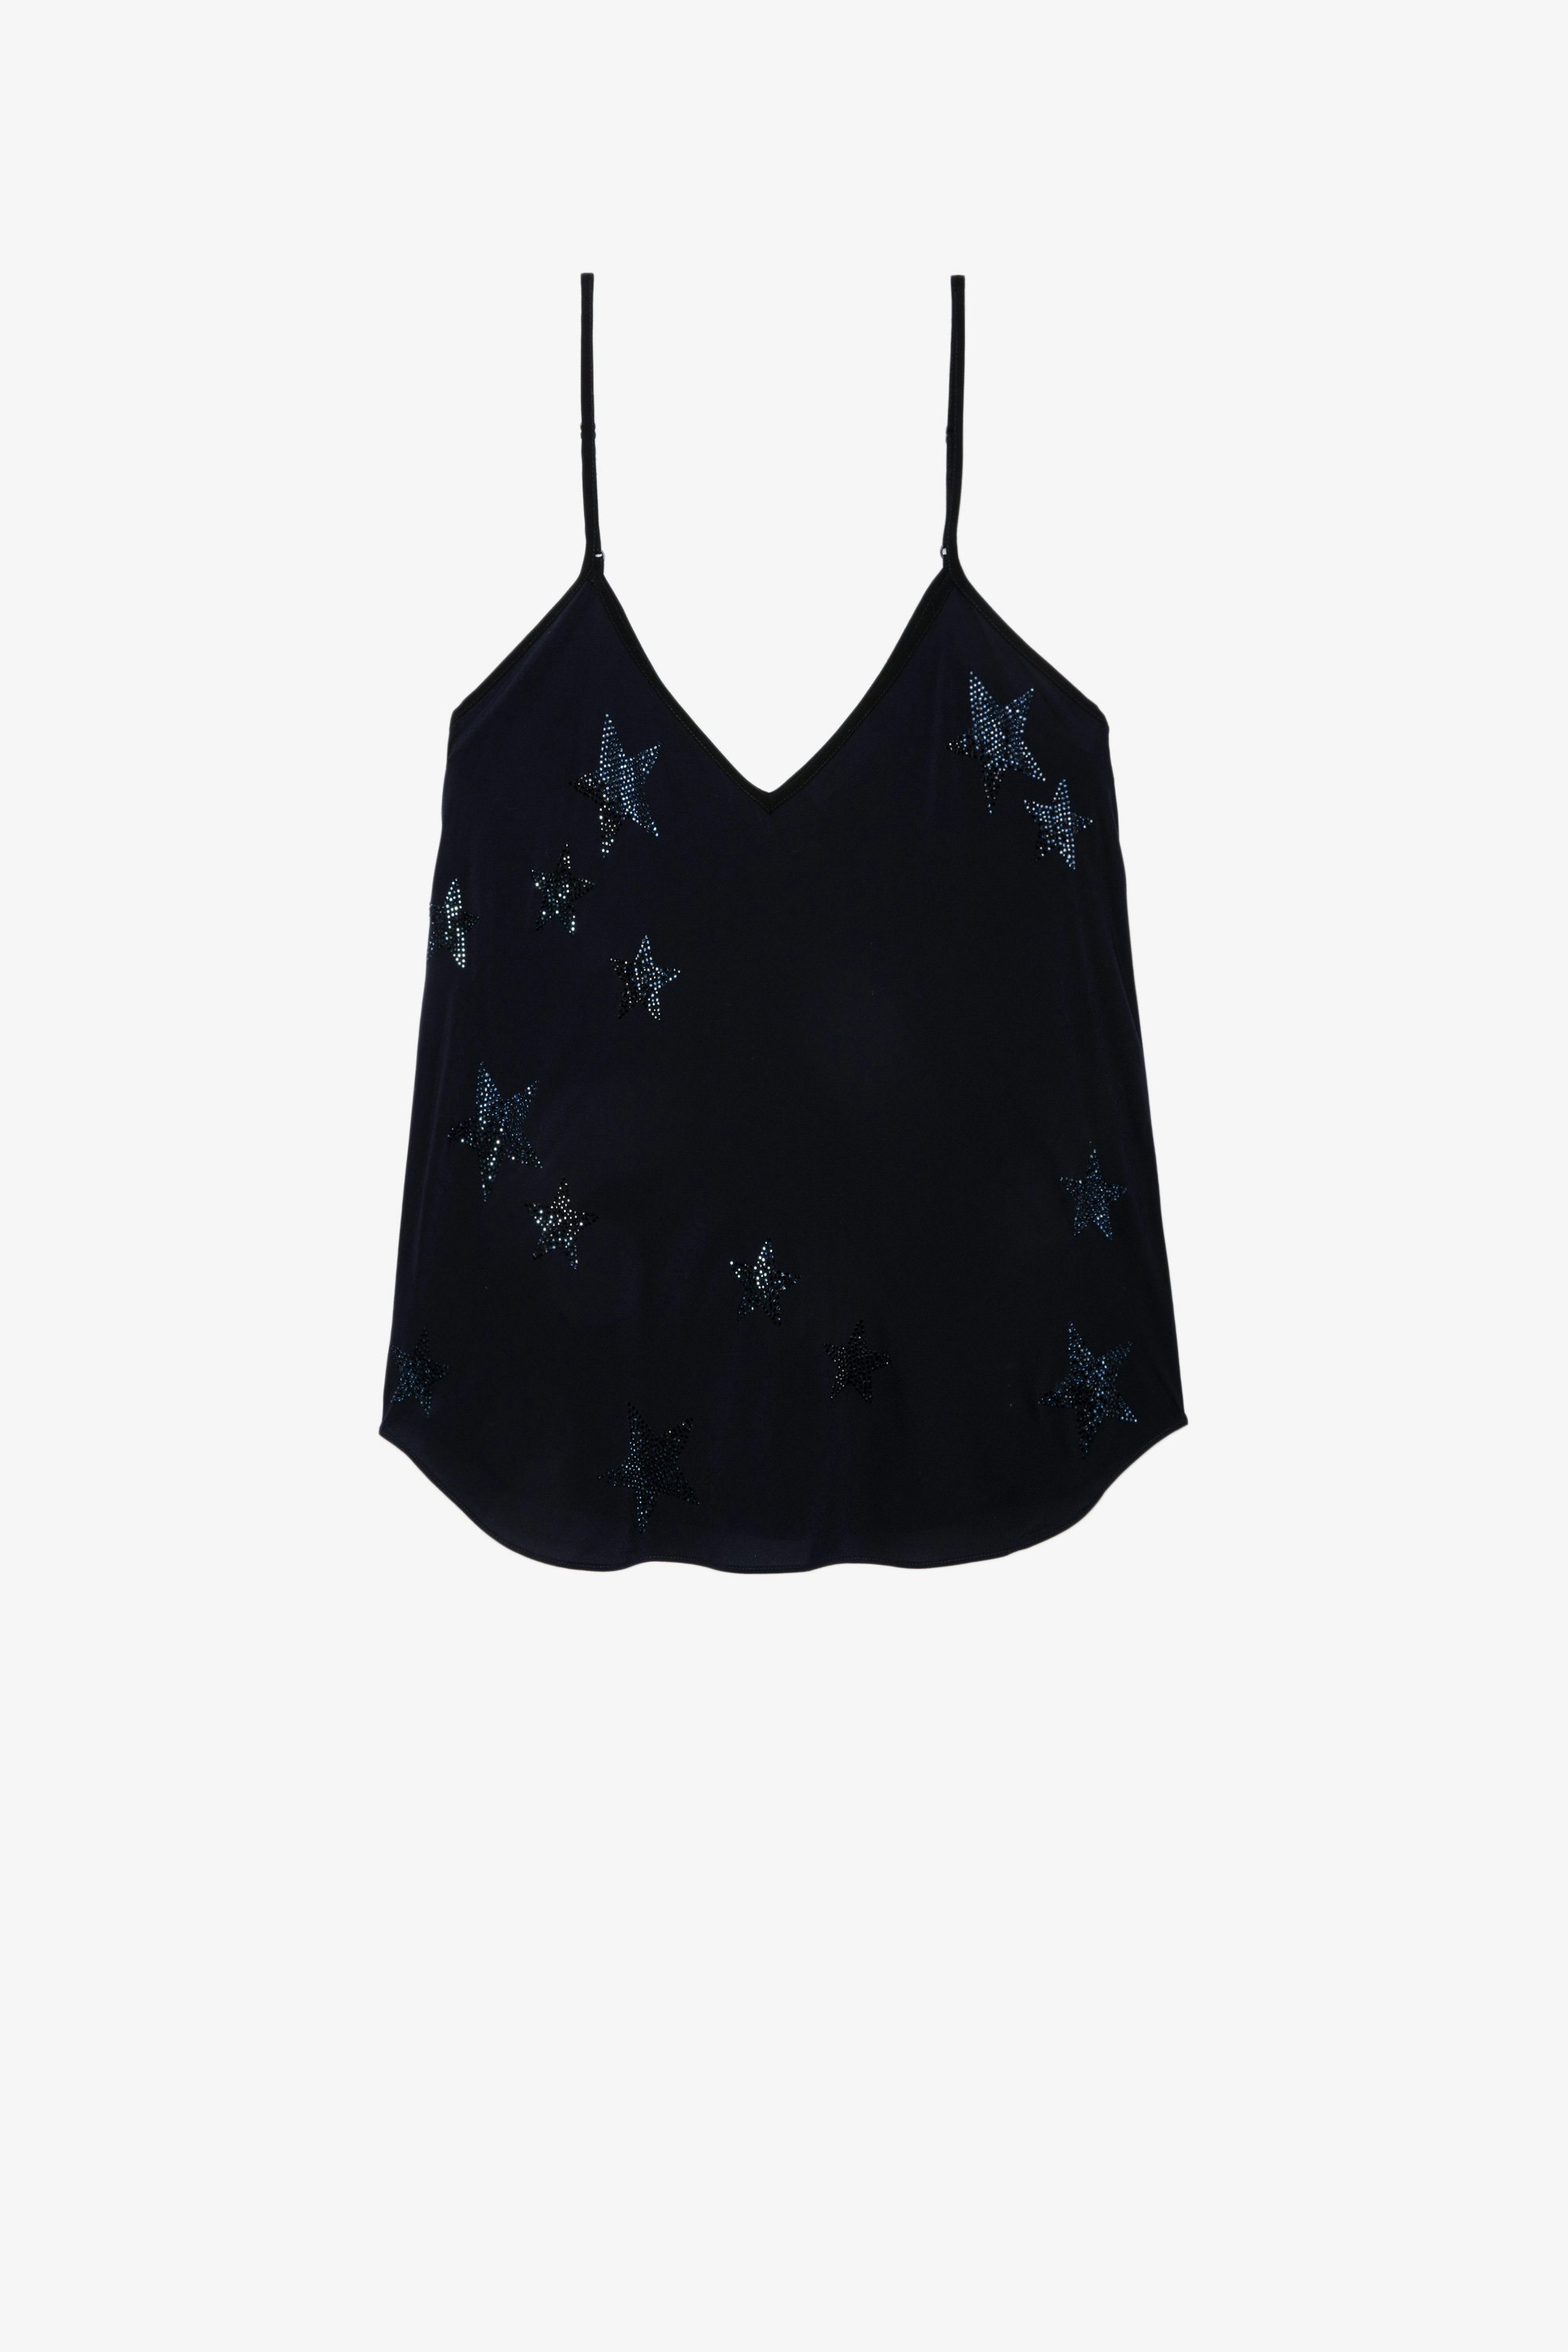 Casel Soft Strass キャミソール Women’s navy blue camisole with thin straps and crystal-embellished stars